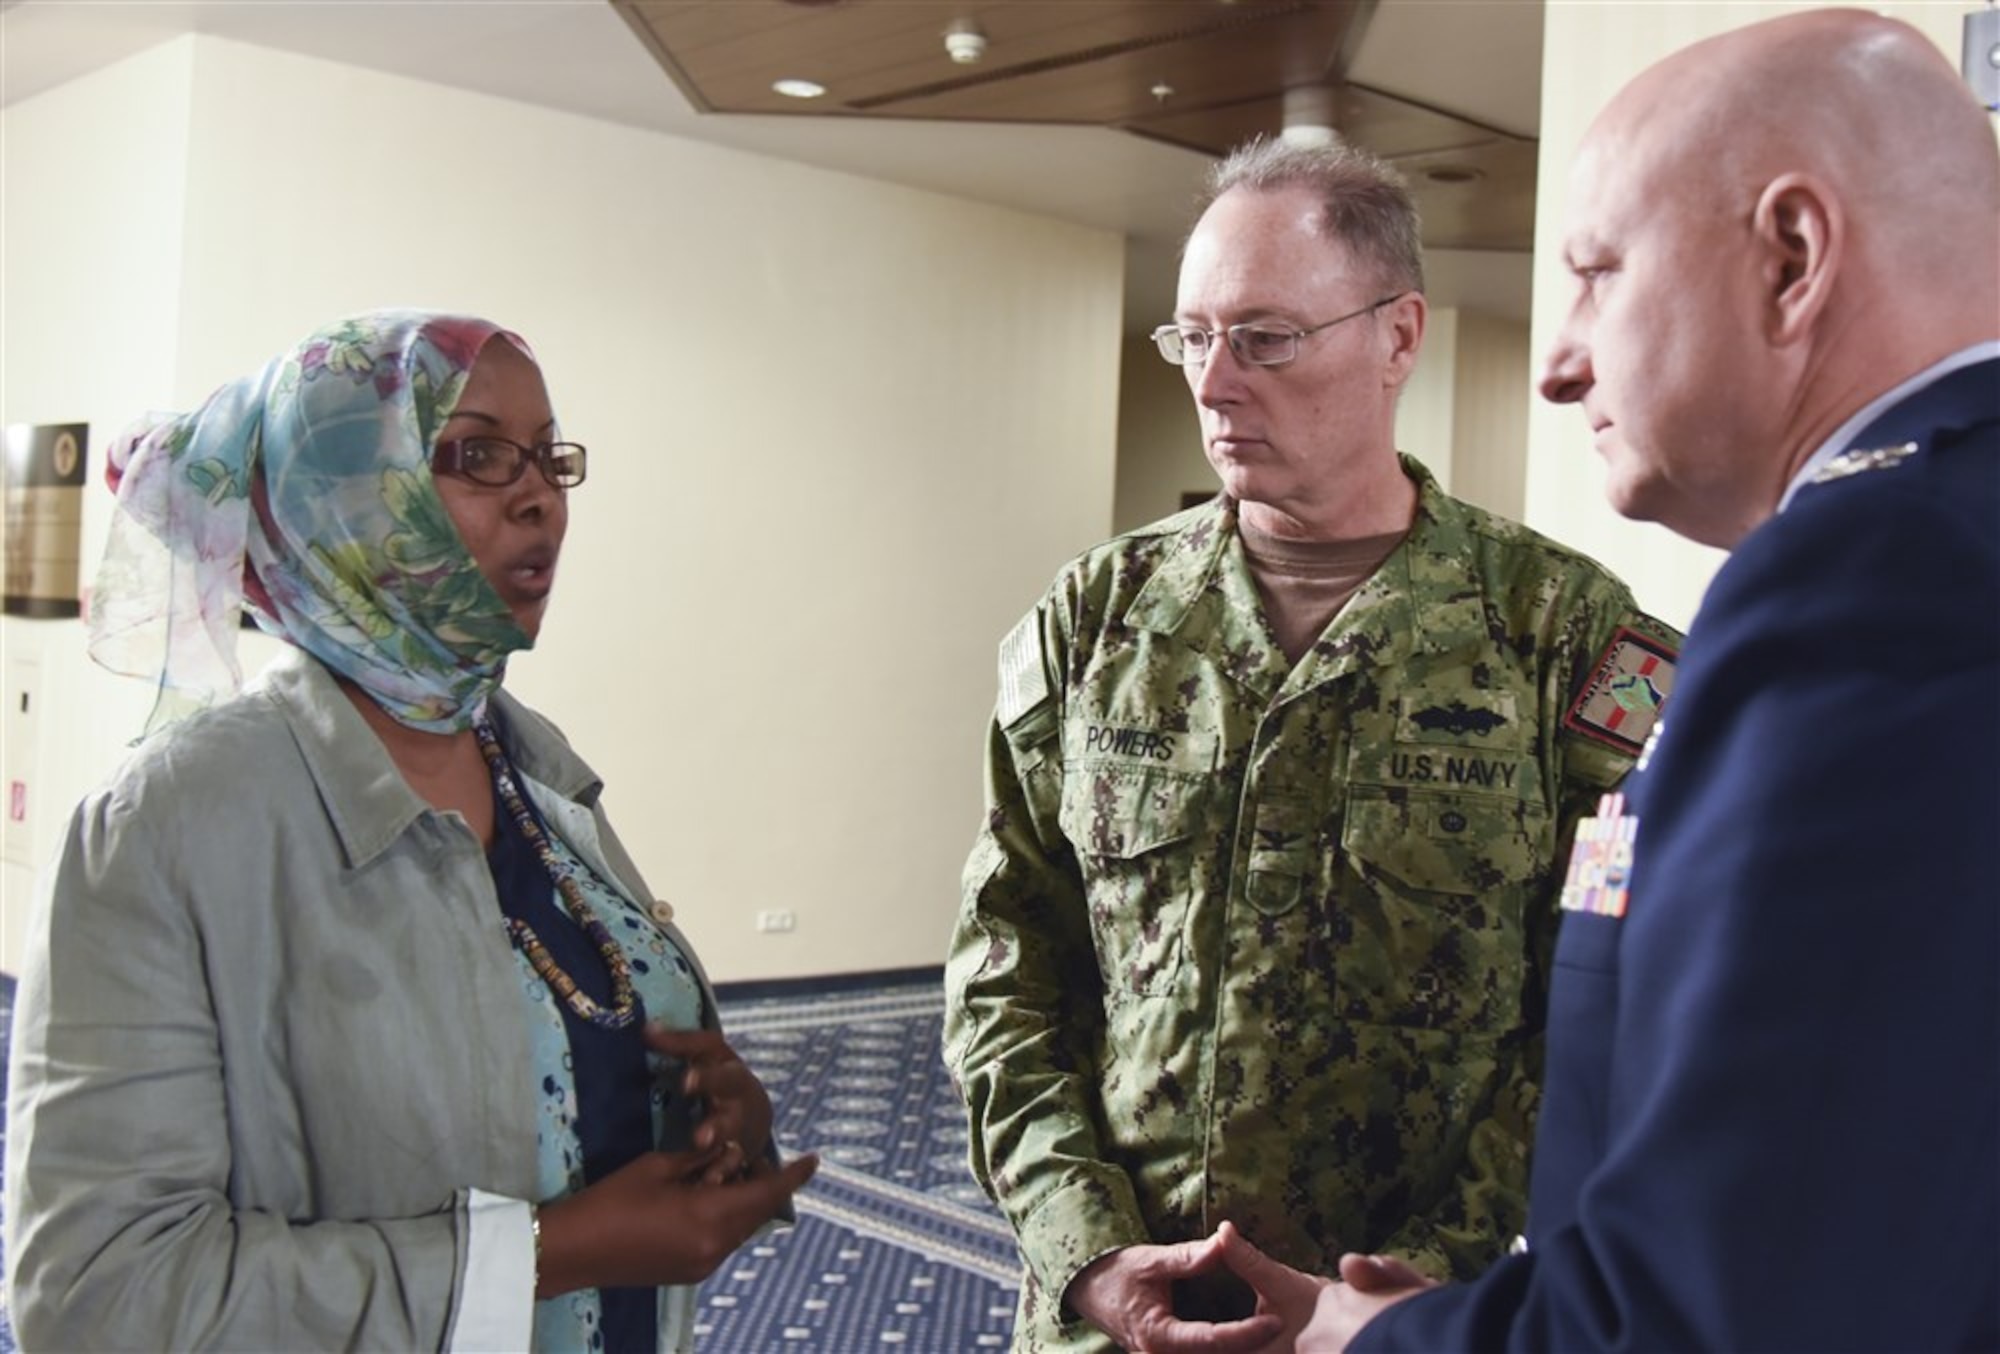 Djibouti Armed Forces Lt. Amina Ahmed Farah, Combined Joint Task Force-Horn of Africa Capt. Roland Powers and U.S. Air National Guard Col. Mike Cooper, discuss priorities in medical training at Ramstein AB, Germany, Aug. 25, 2015. The goal of this symposium was for African partners to possess greater medical support capacity and the ability to sustain medical readiness through African institutions. (U.S. Air Force photo by Master Sgt. Charlene M. Spade/released) 